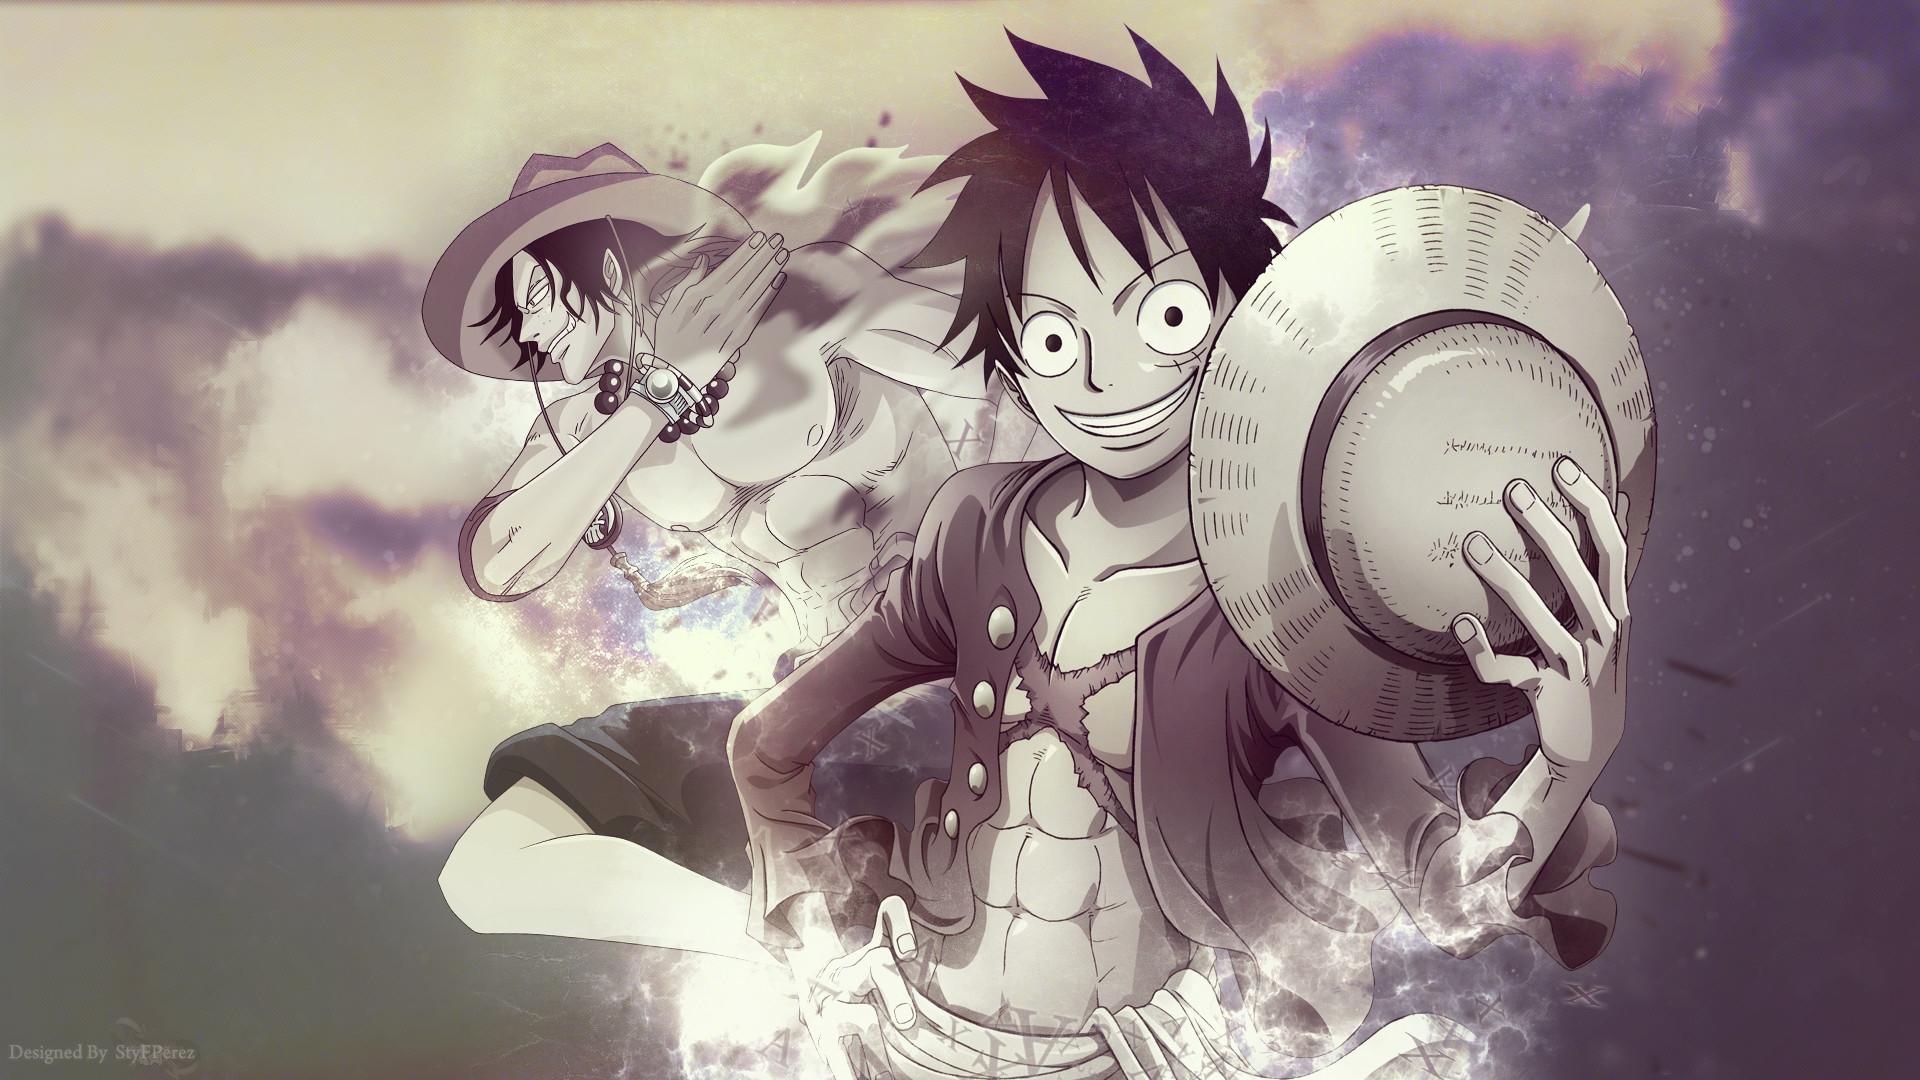 Luffy Thepirateking 34 8 Luffy And Ace By Styf17 1920x1080